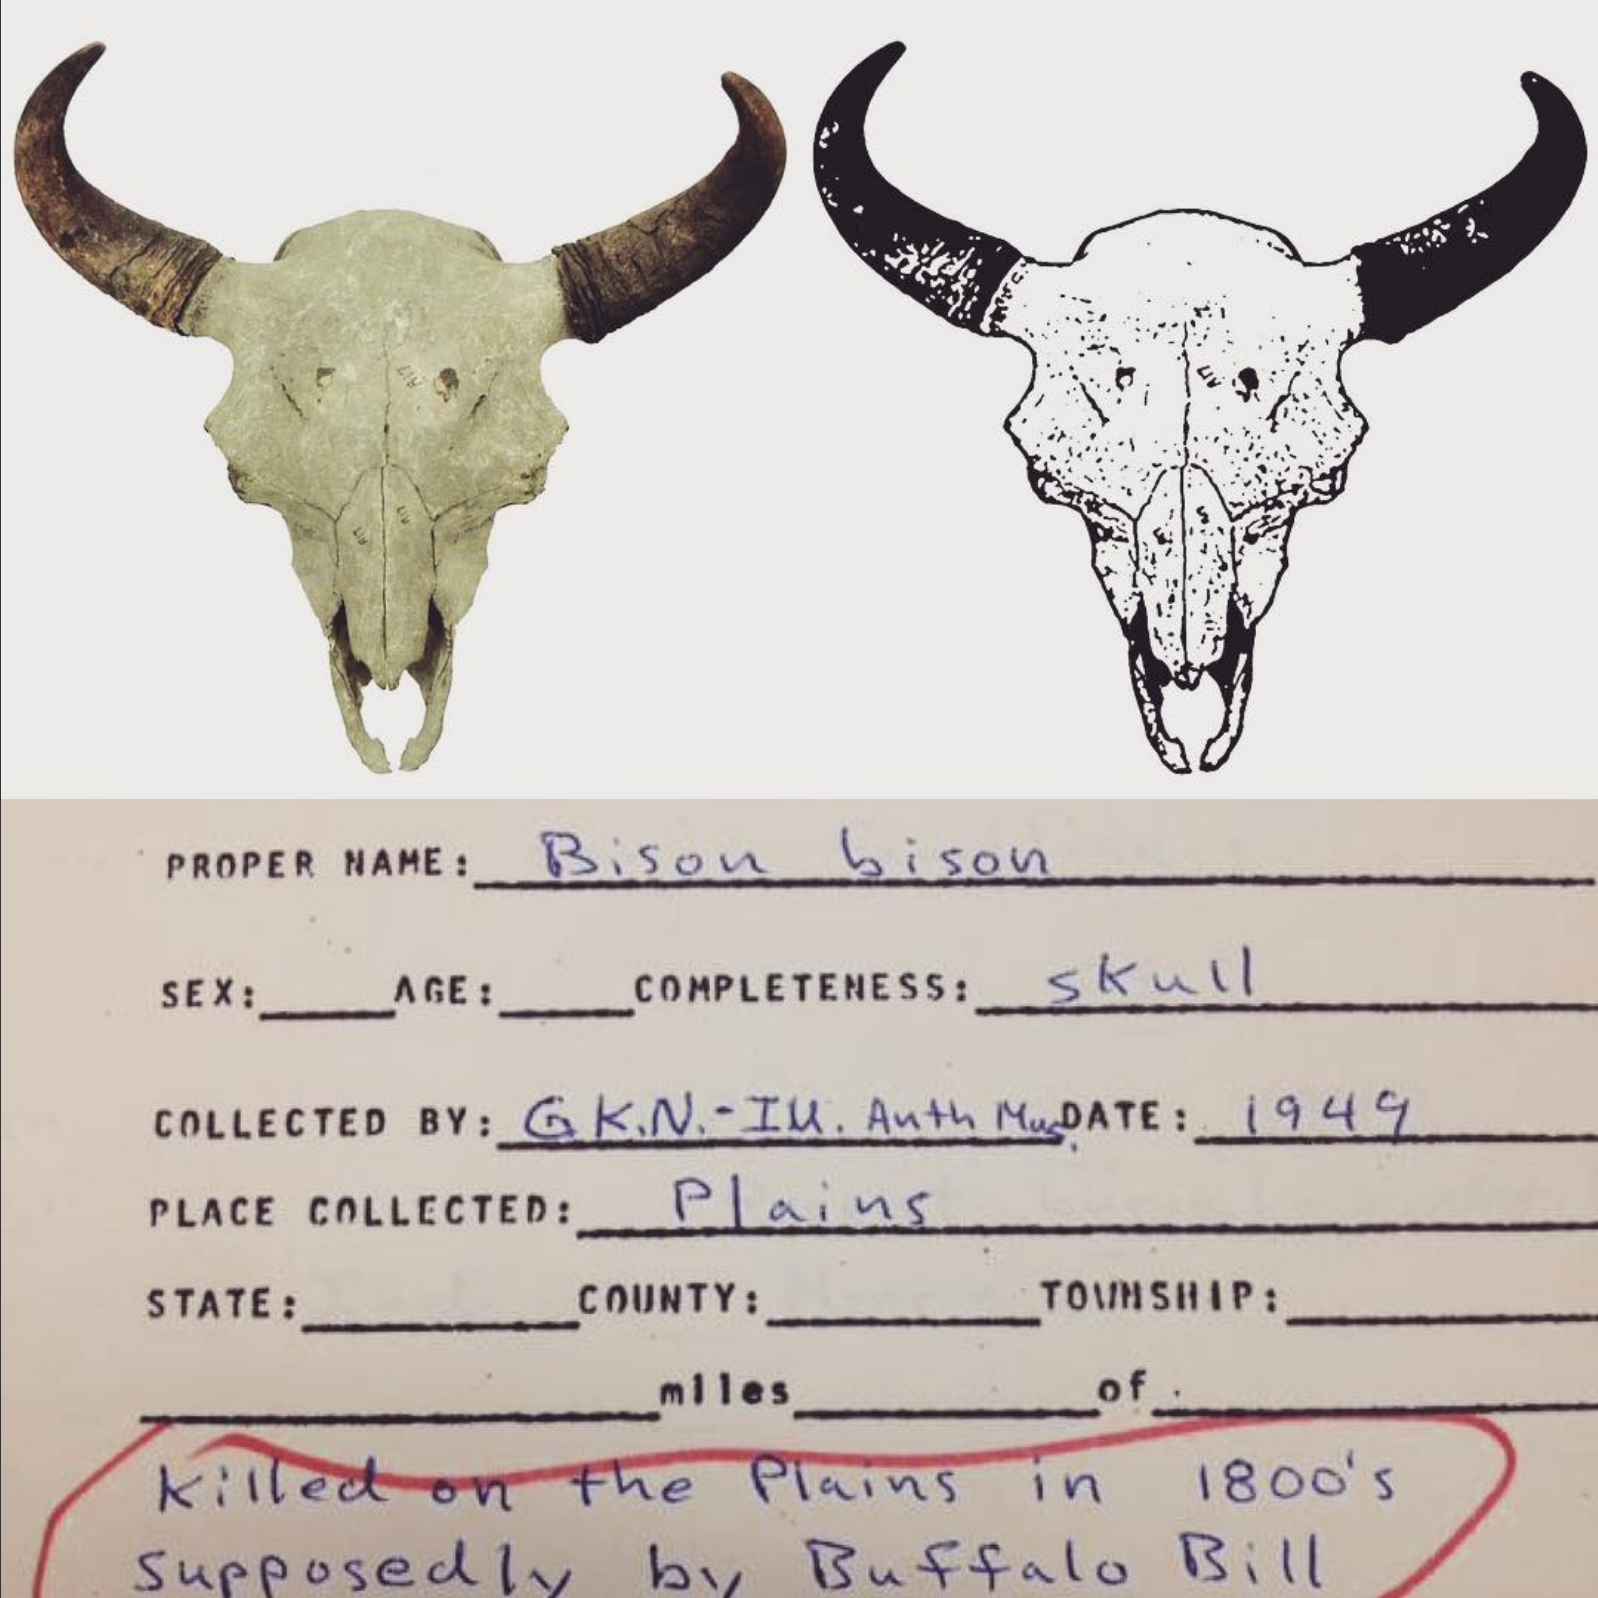 Accession notes claiming a bison skull was collected by Buffalo Bill